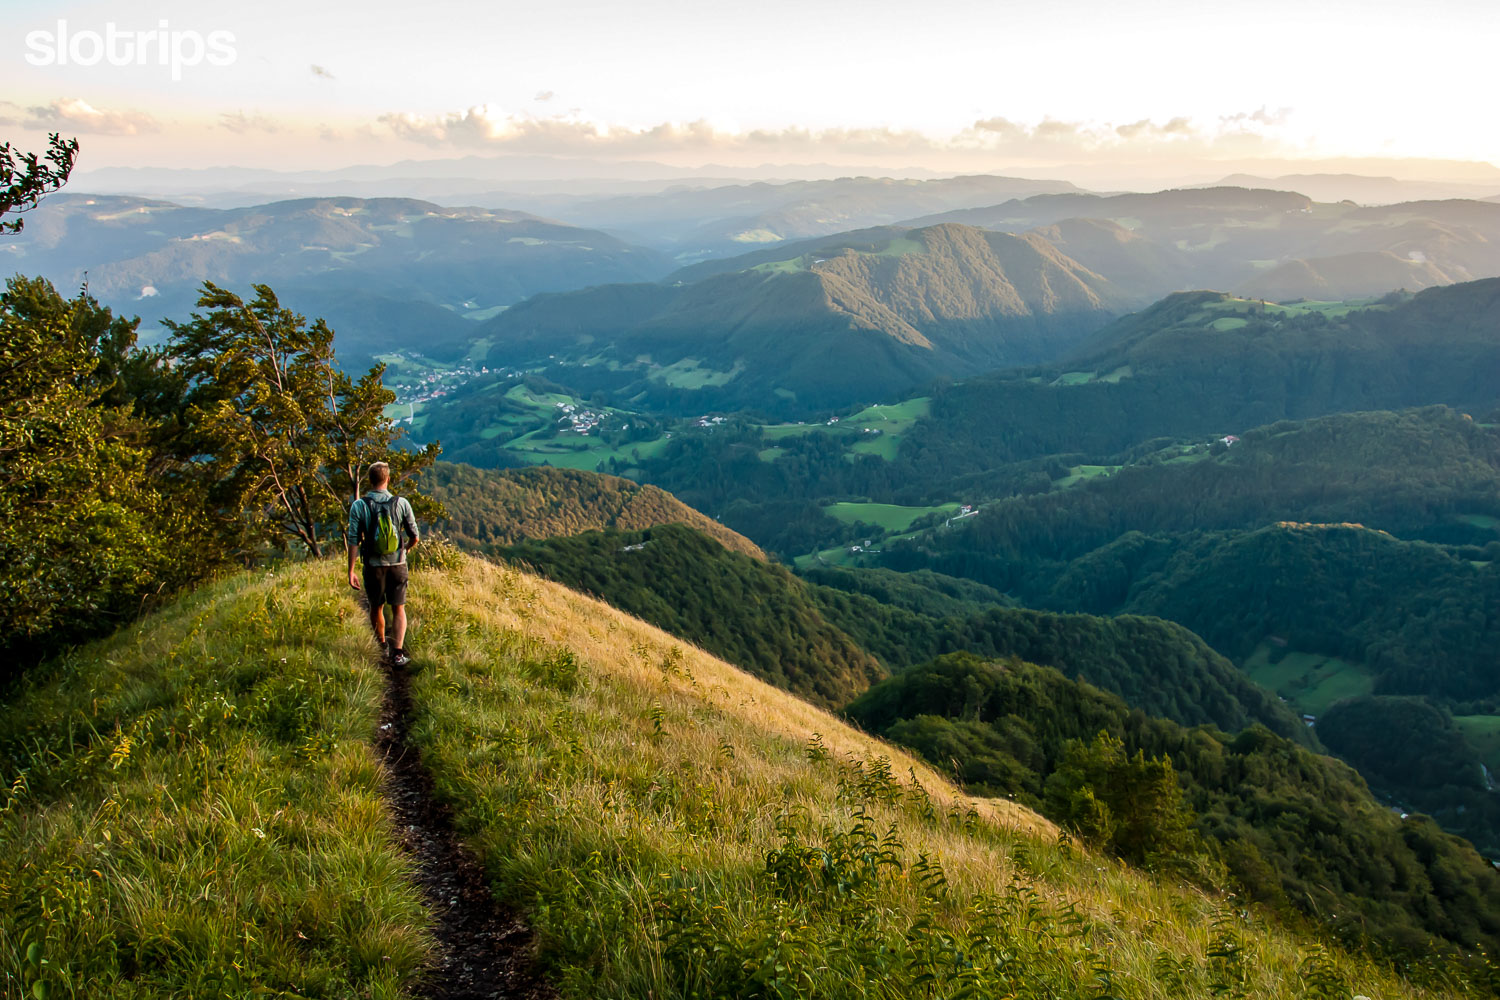 Hiker descending the grassy Blegos mountain ridge in the sunset, surrounded with the wooded Skofja Loka hills.